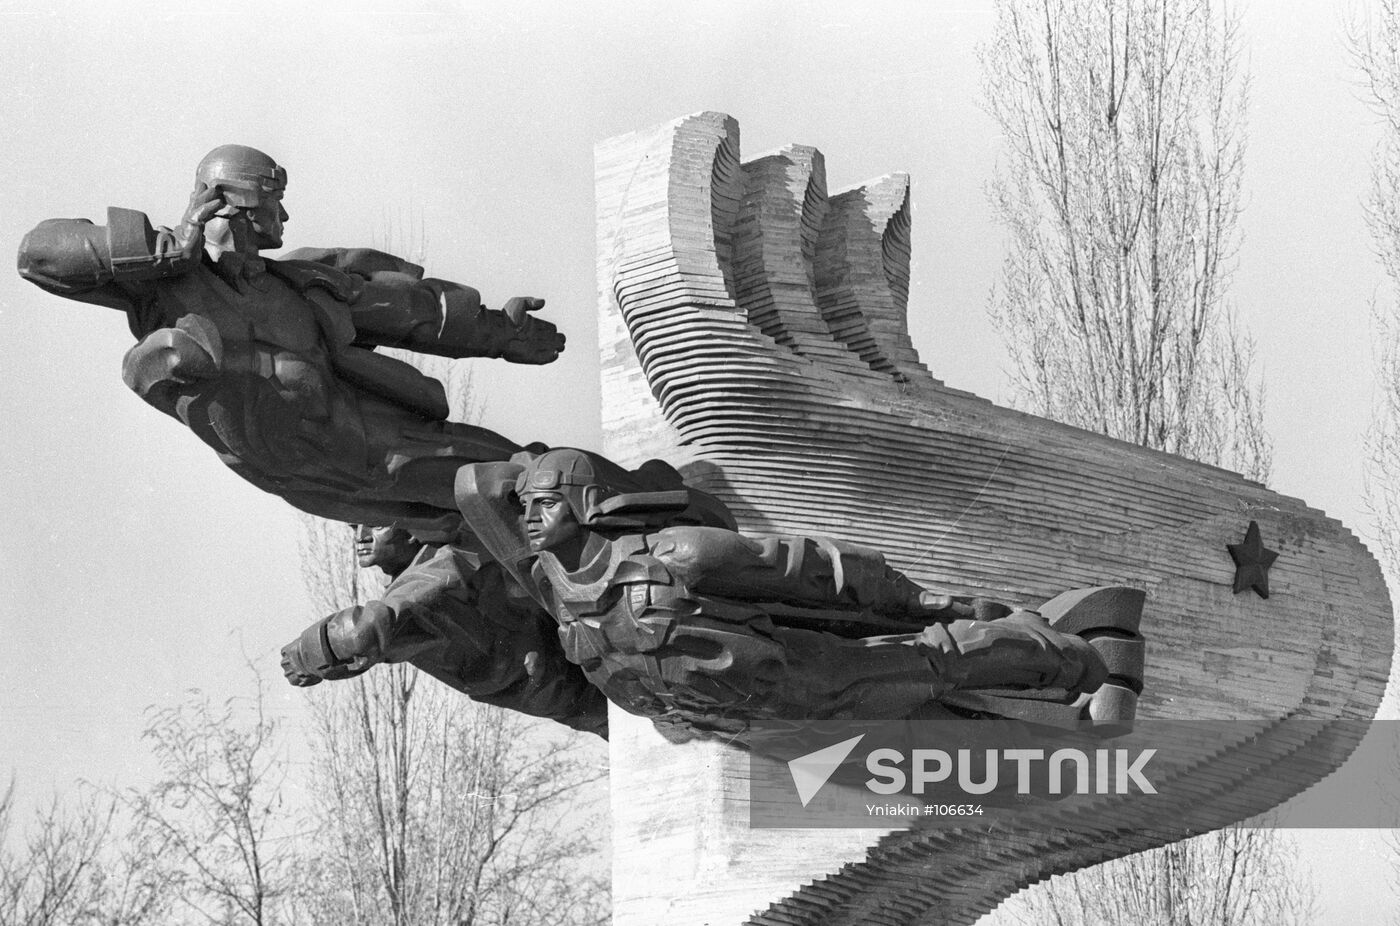 69TH AIR REGIMENT MONUMENT WWII